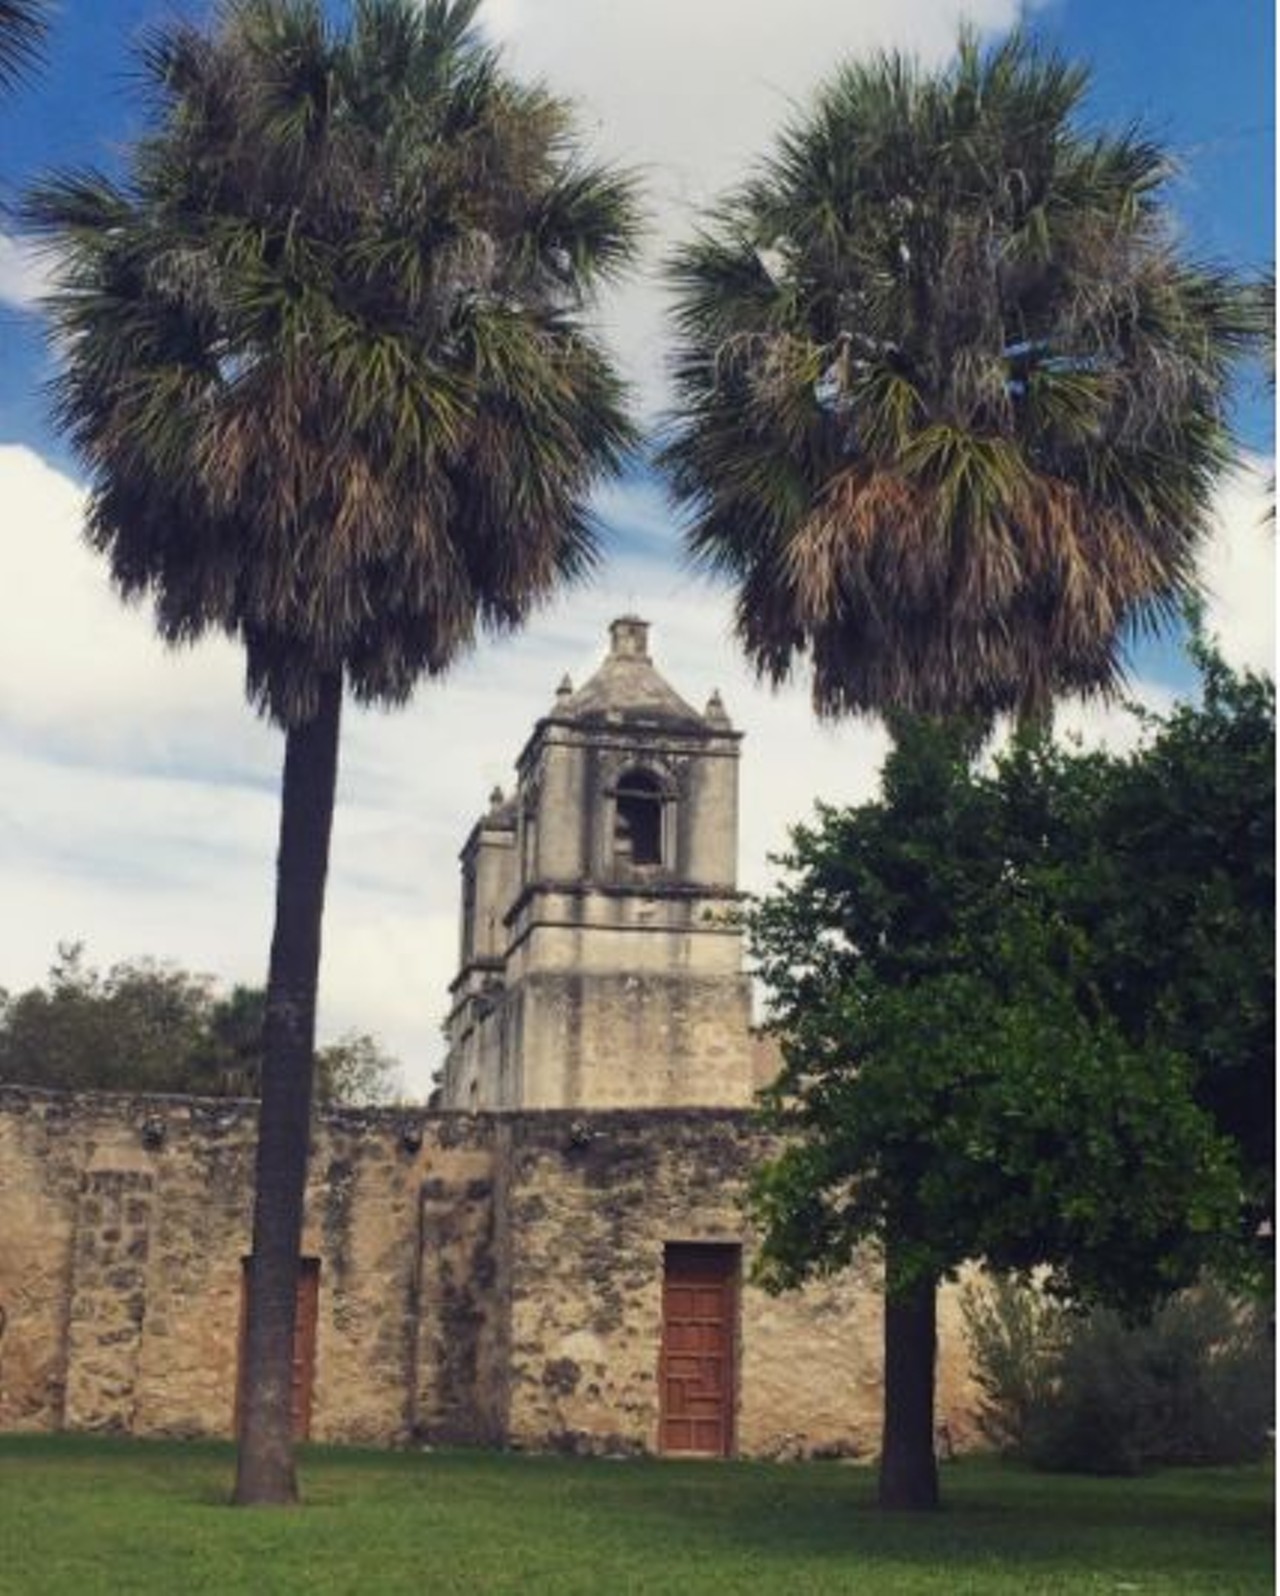 Visit the San Antonio Missions
(210) 932-1001, 6701 San Jose Dr,
nps.gov/saan
Have a free history field day with a trip to the San Antonio Missions.
Photo via Instagram 
janieb123
